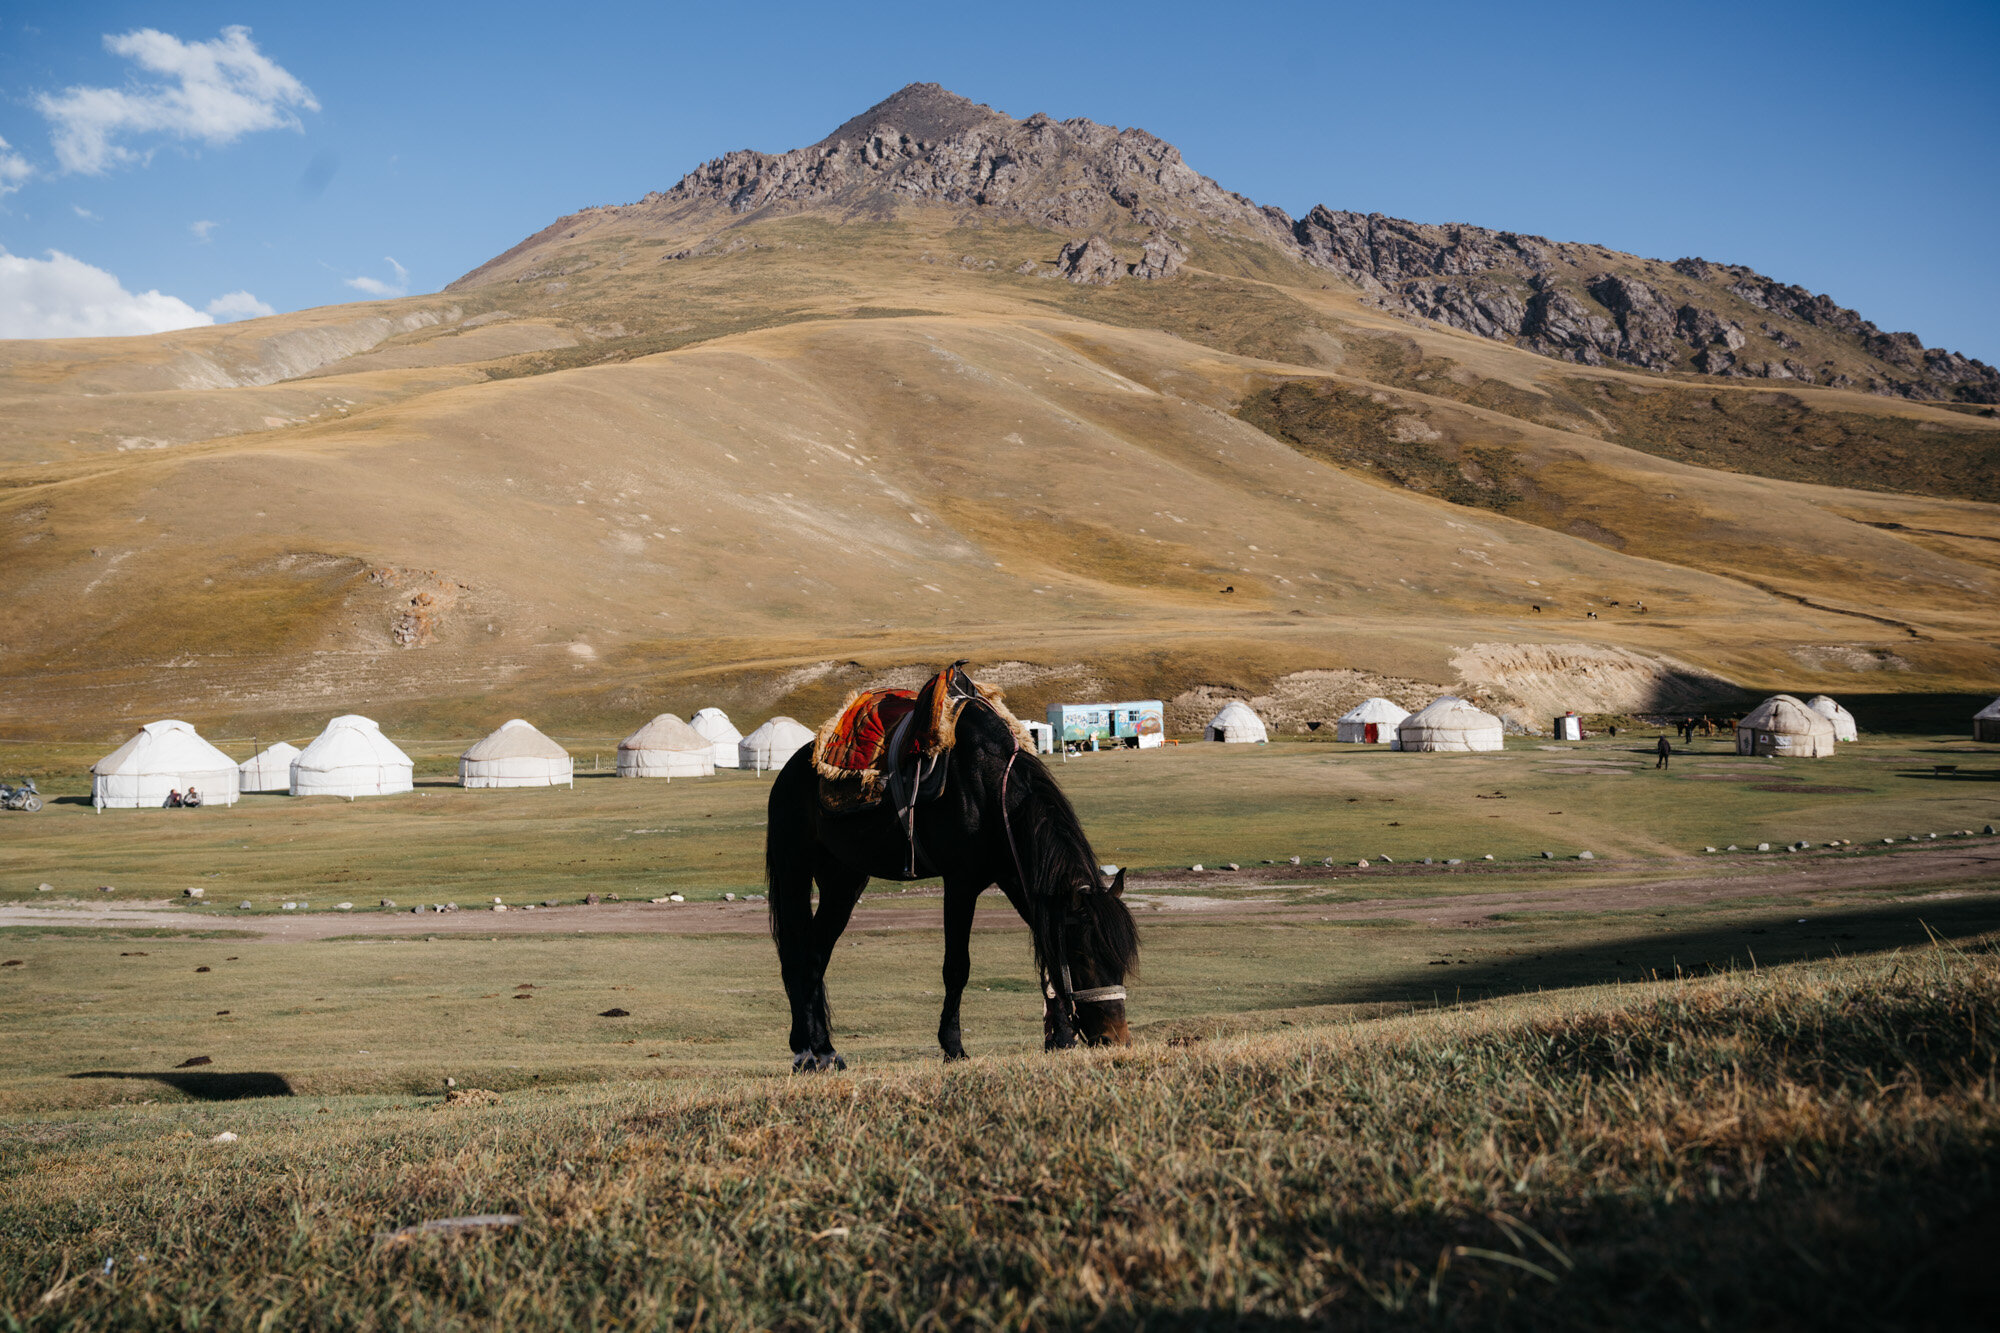  A nearby horse with some yurts in the background 